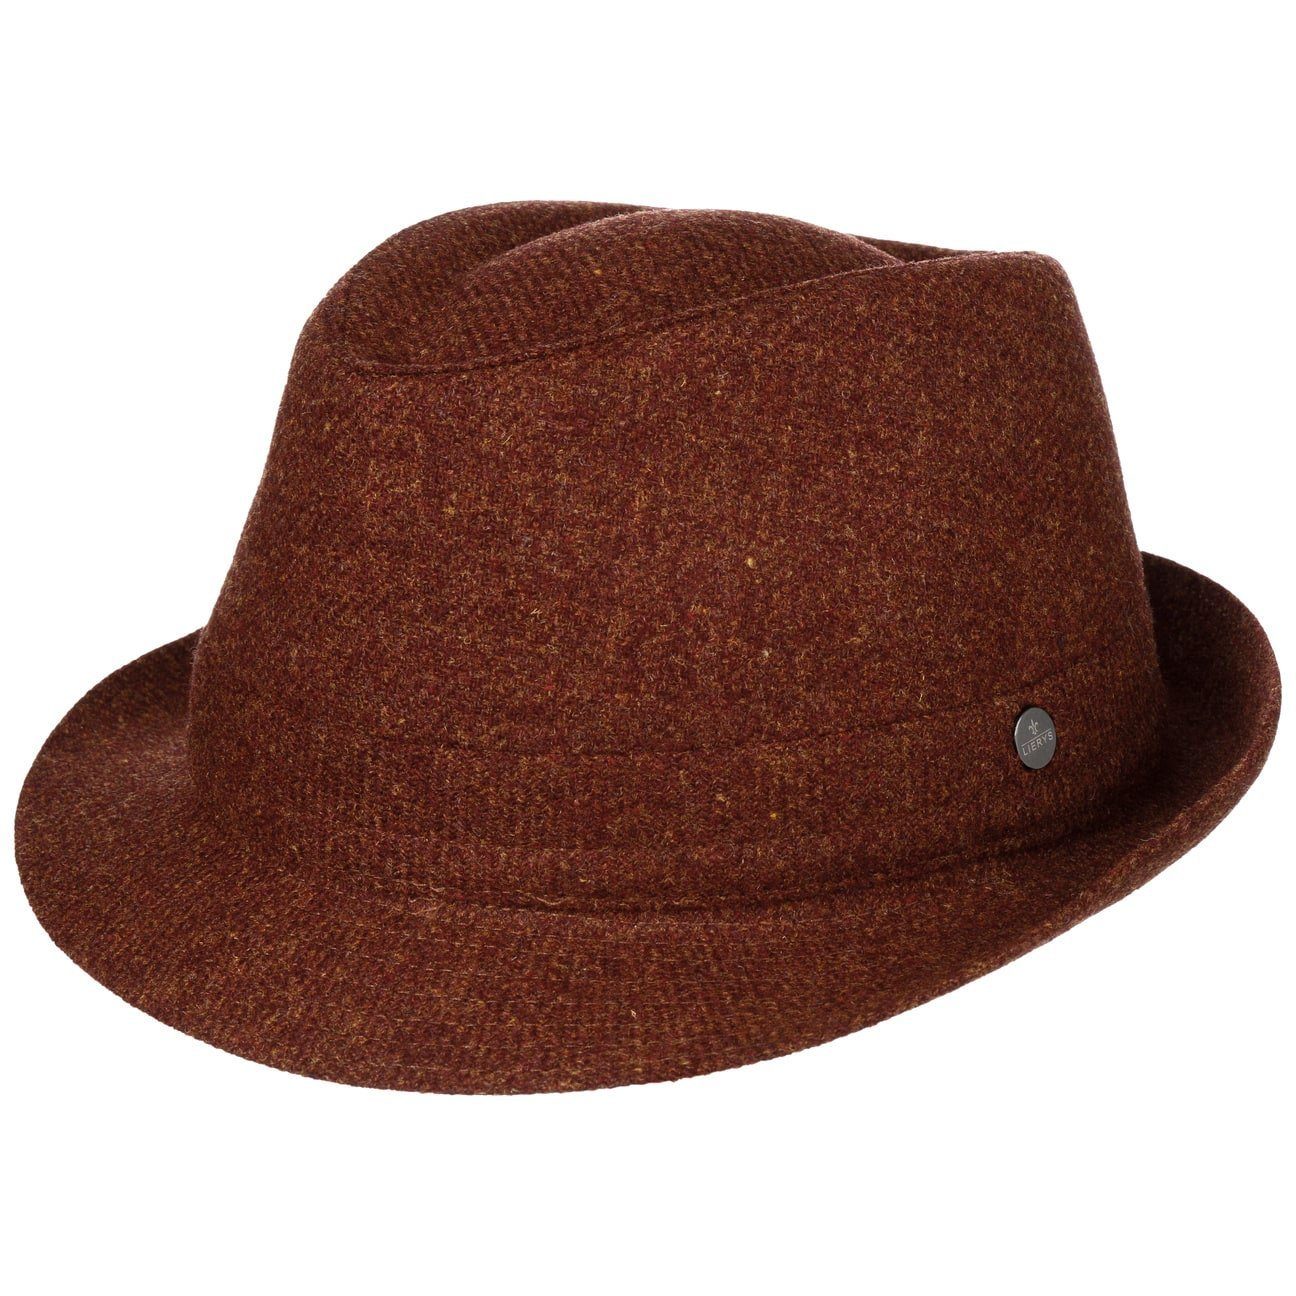 Lierys Trilby (1-St) Wolltrilby mit Futter, Made in Italy rost